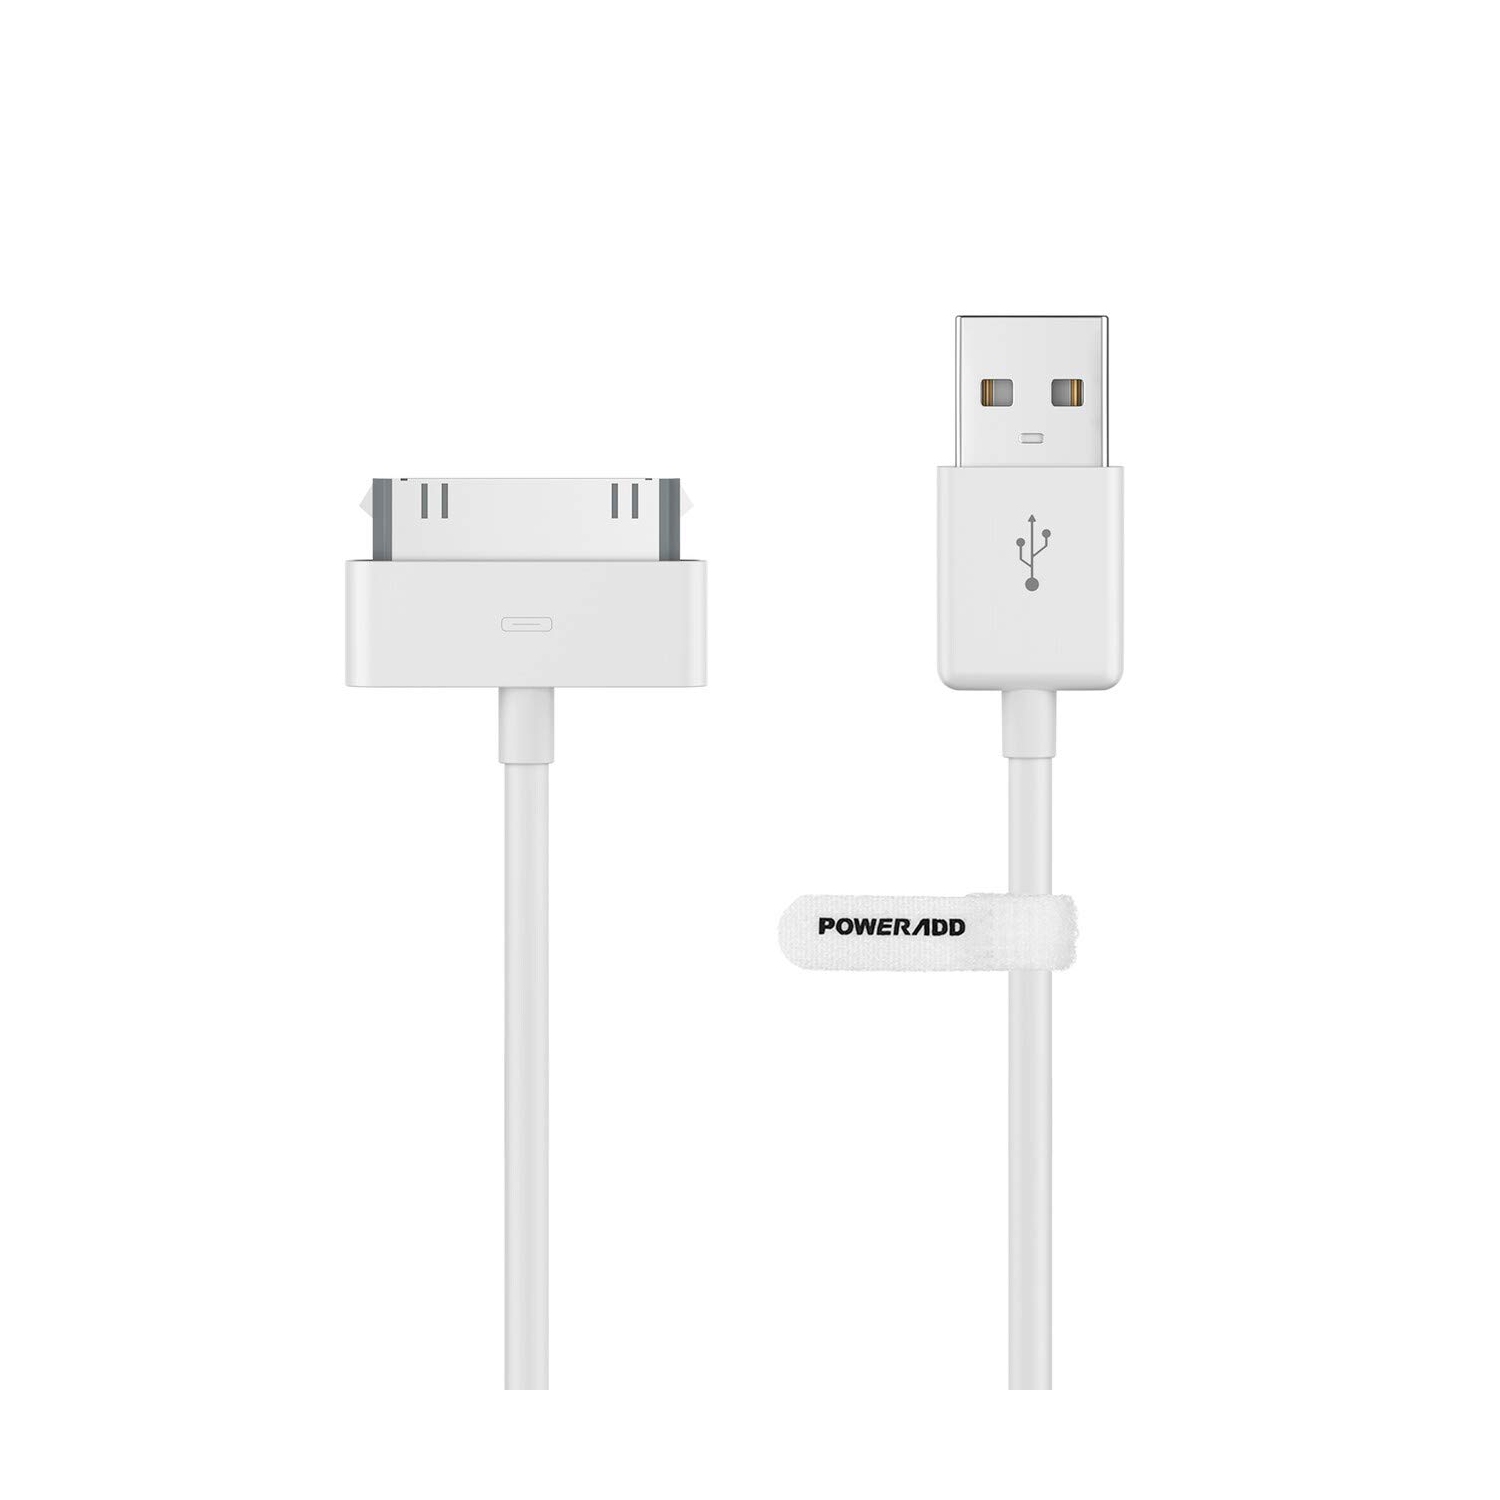 Poweradd Apple Certified iPhone 4 4s 3G 3GS iPad 1 2 3 iPod Touch Nano 30 Pin Charger USB Sync Cable Charging Cord Dock Ada...